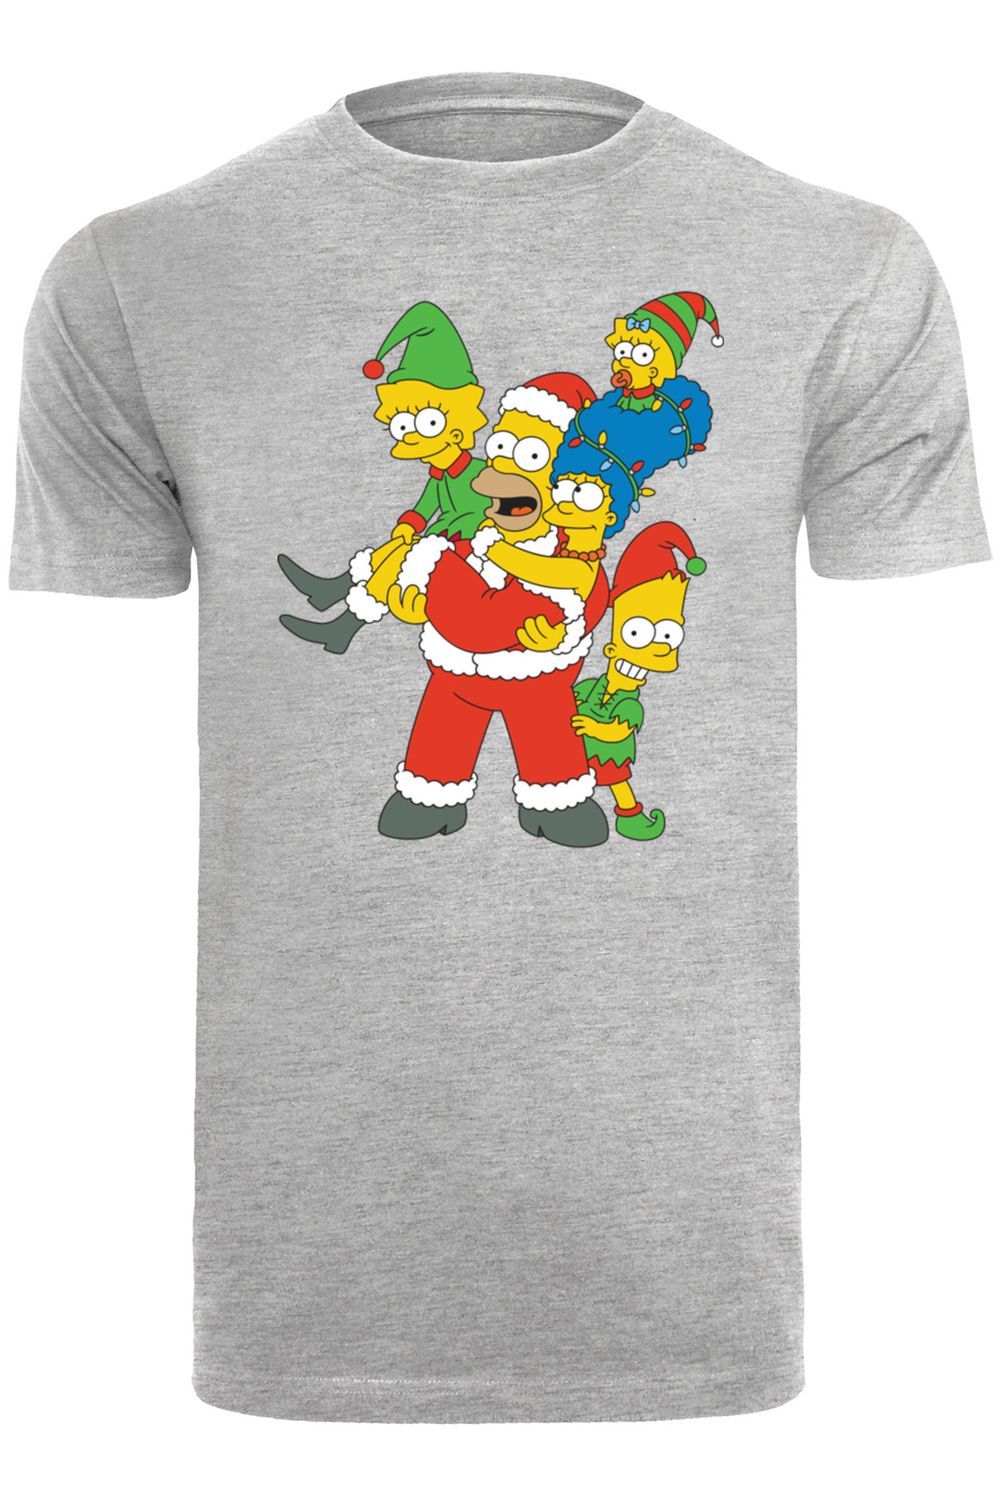 The Family Rundhals F4NT4STIC - T-Shirt Herren -GRY Christmas Trendyol Simpsons mit